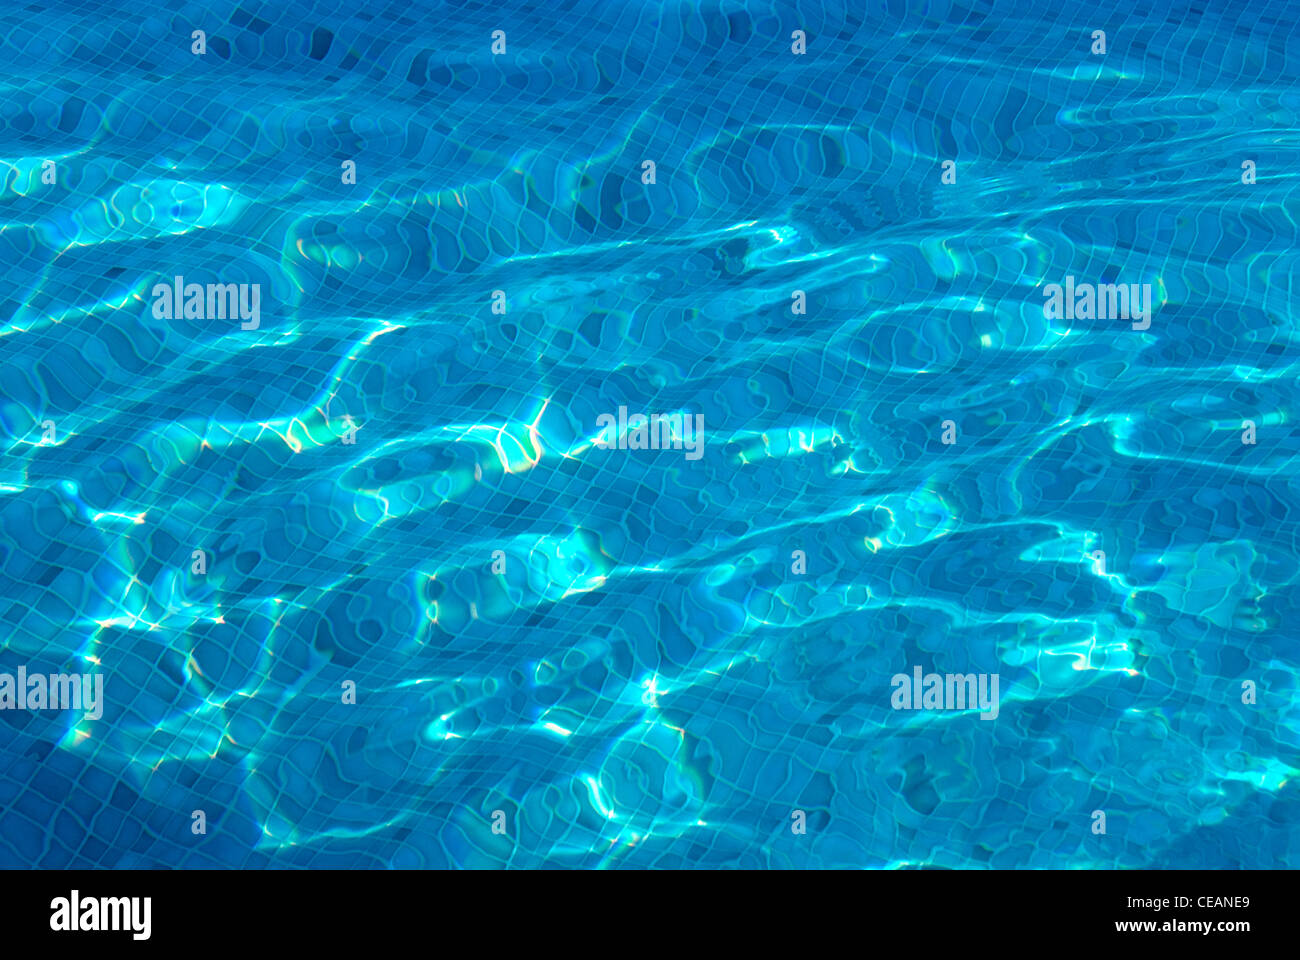 Swimming pool water reflections Stock Photo